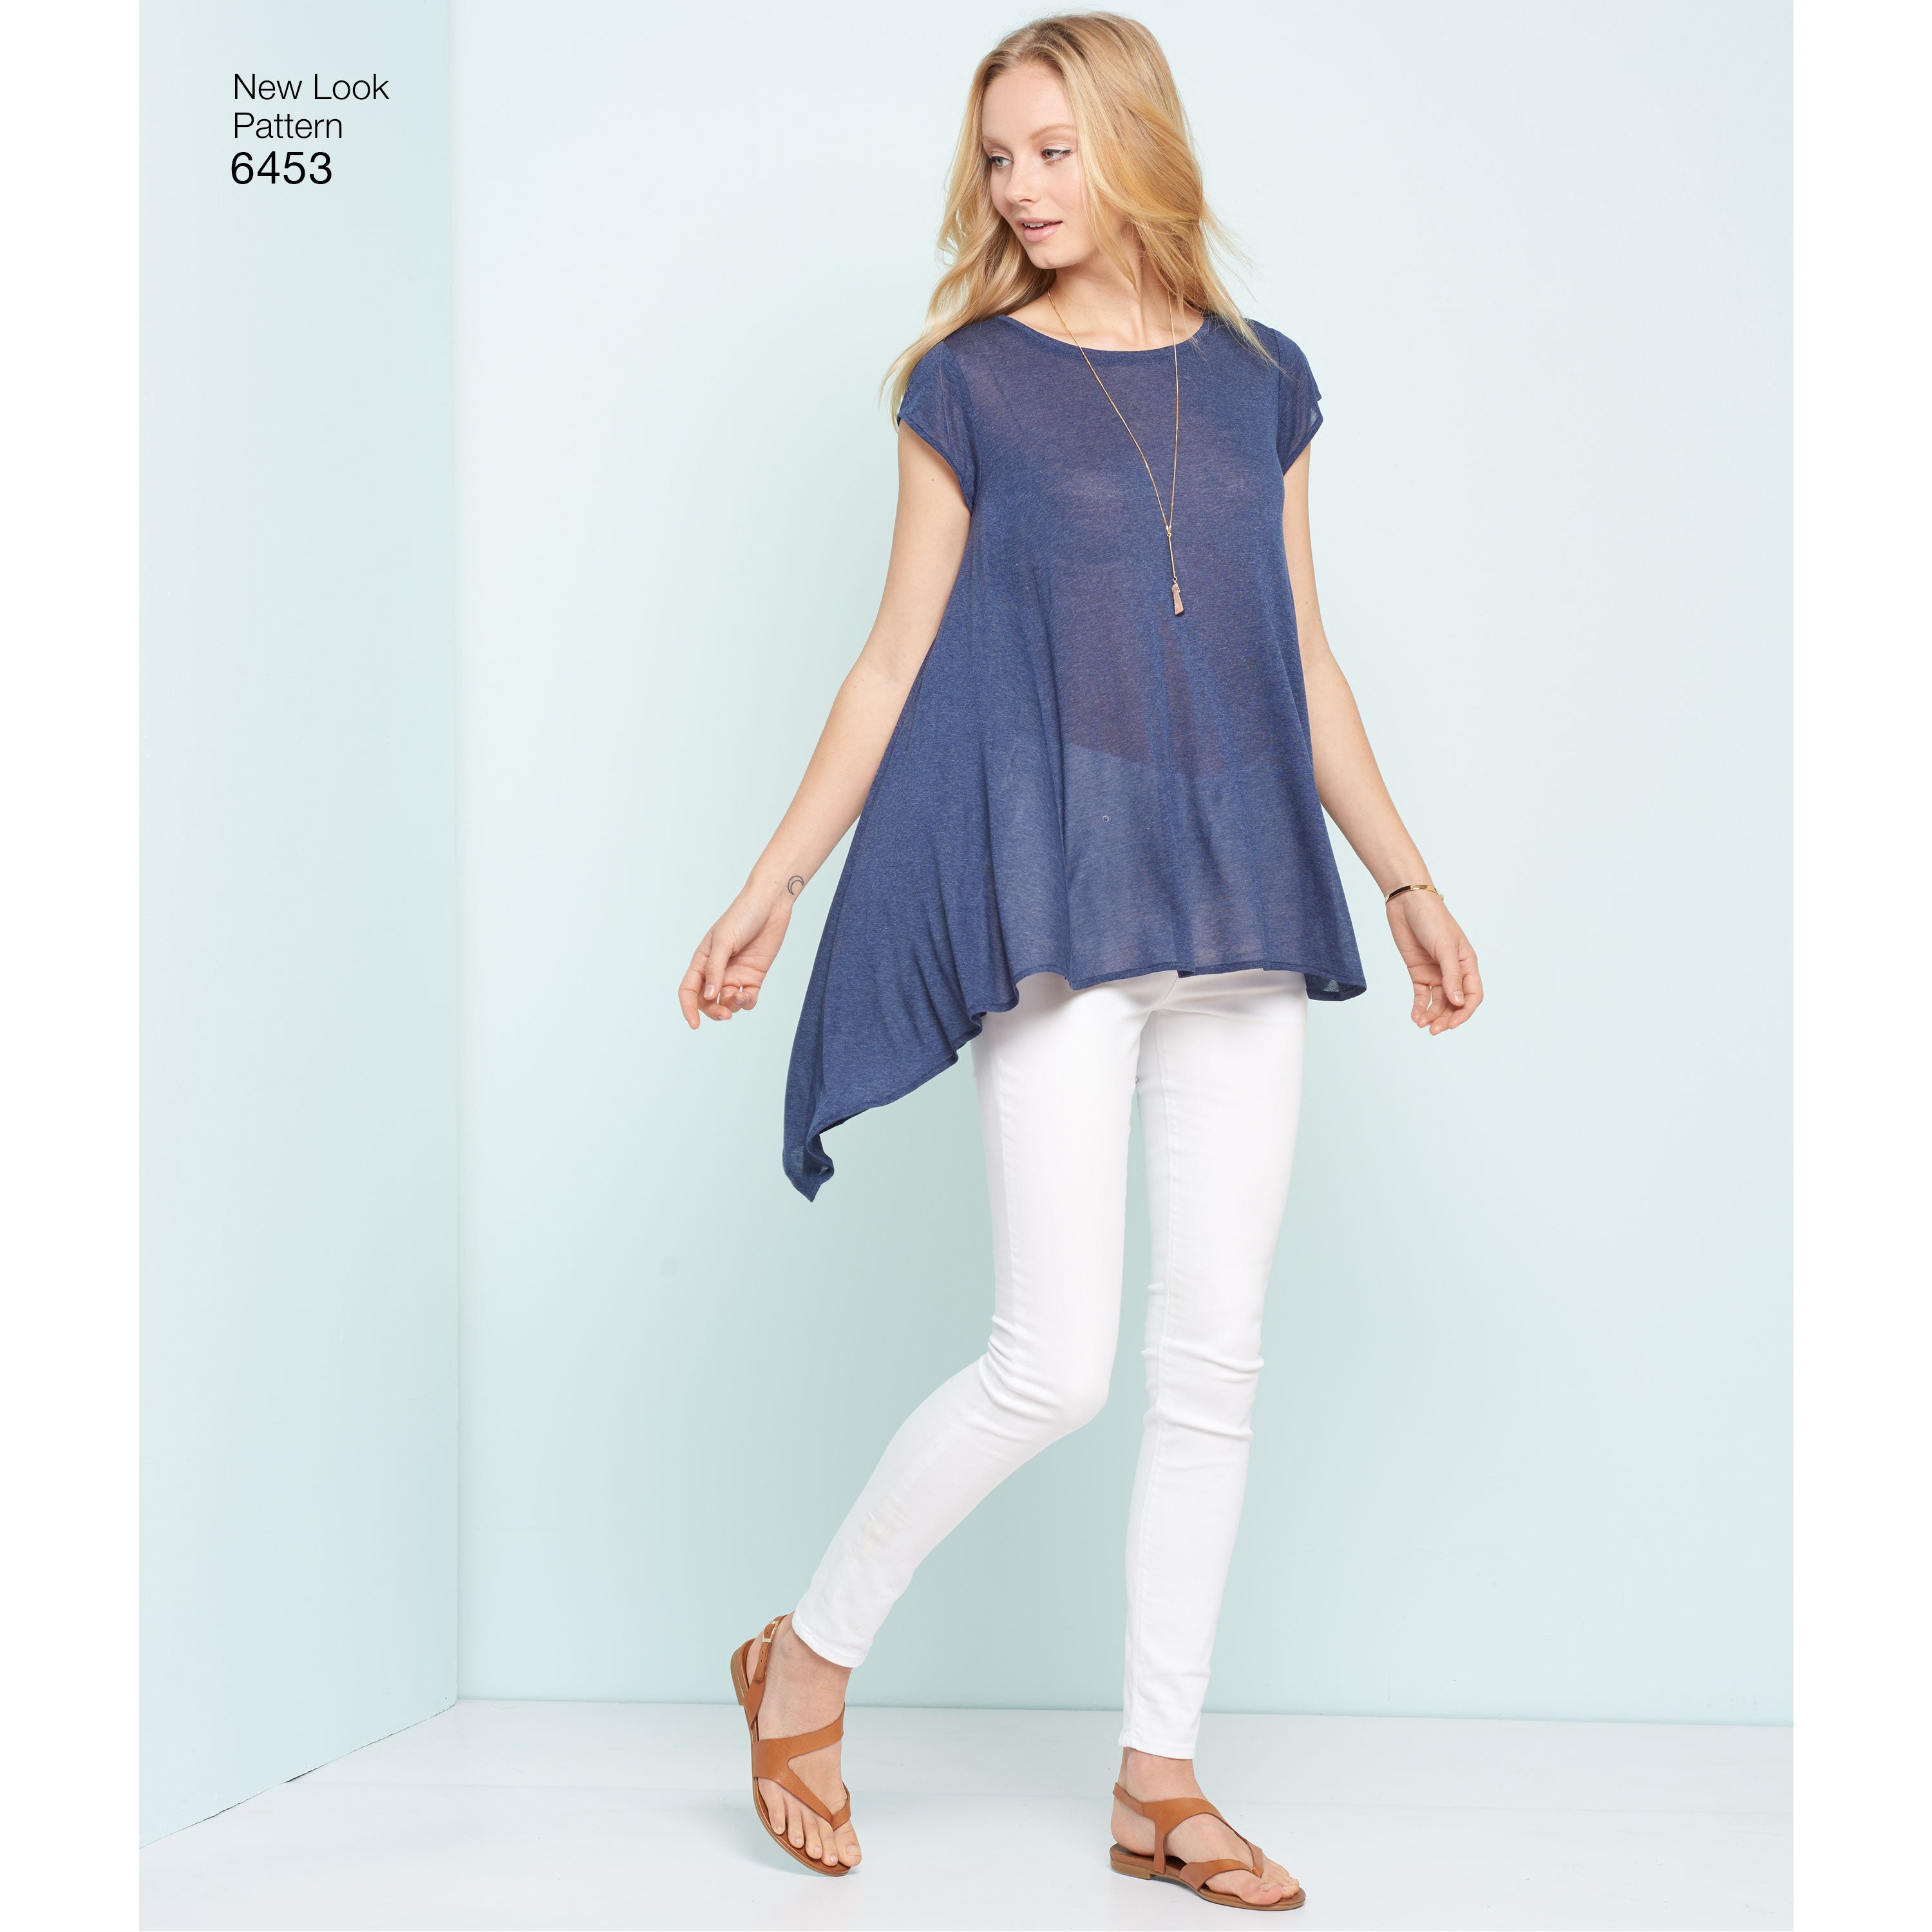 NL6453 Misses' Easy Knit Tops from Jaycotts Sewing Supplies